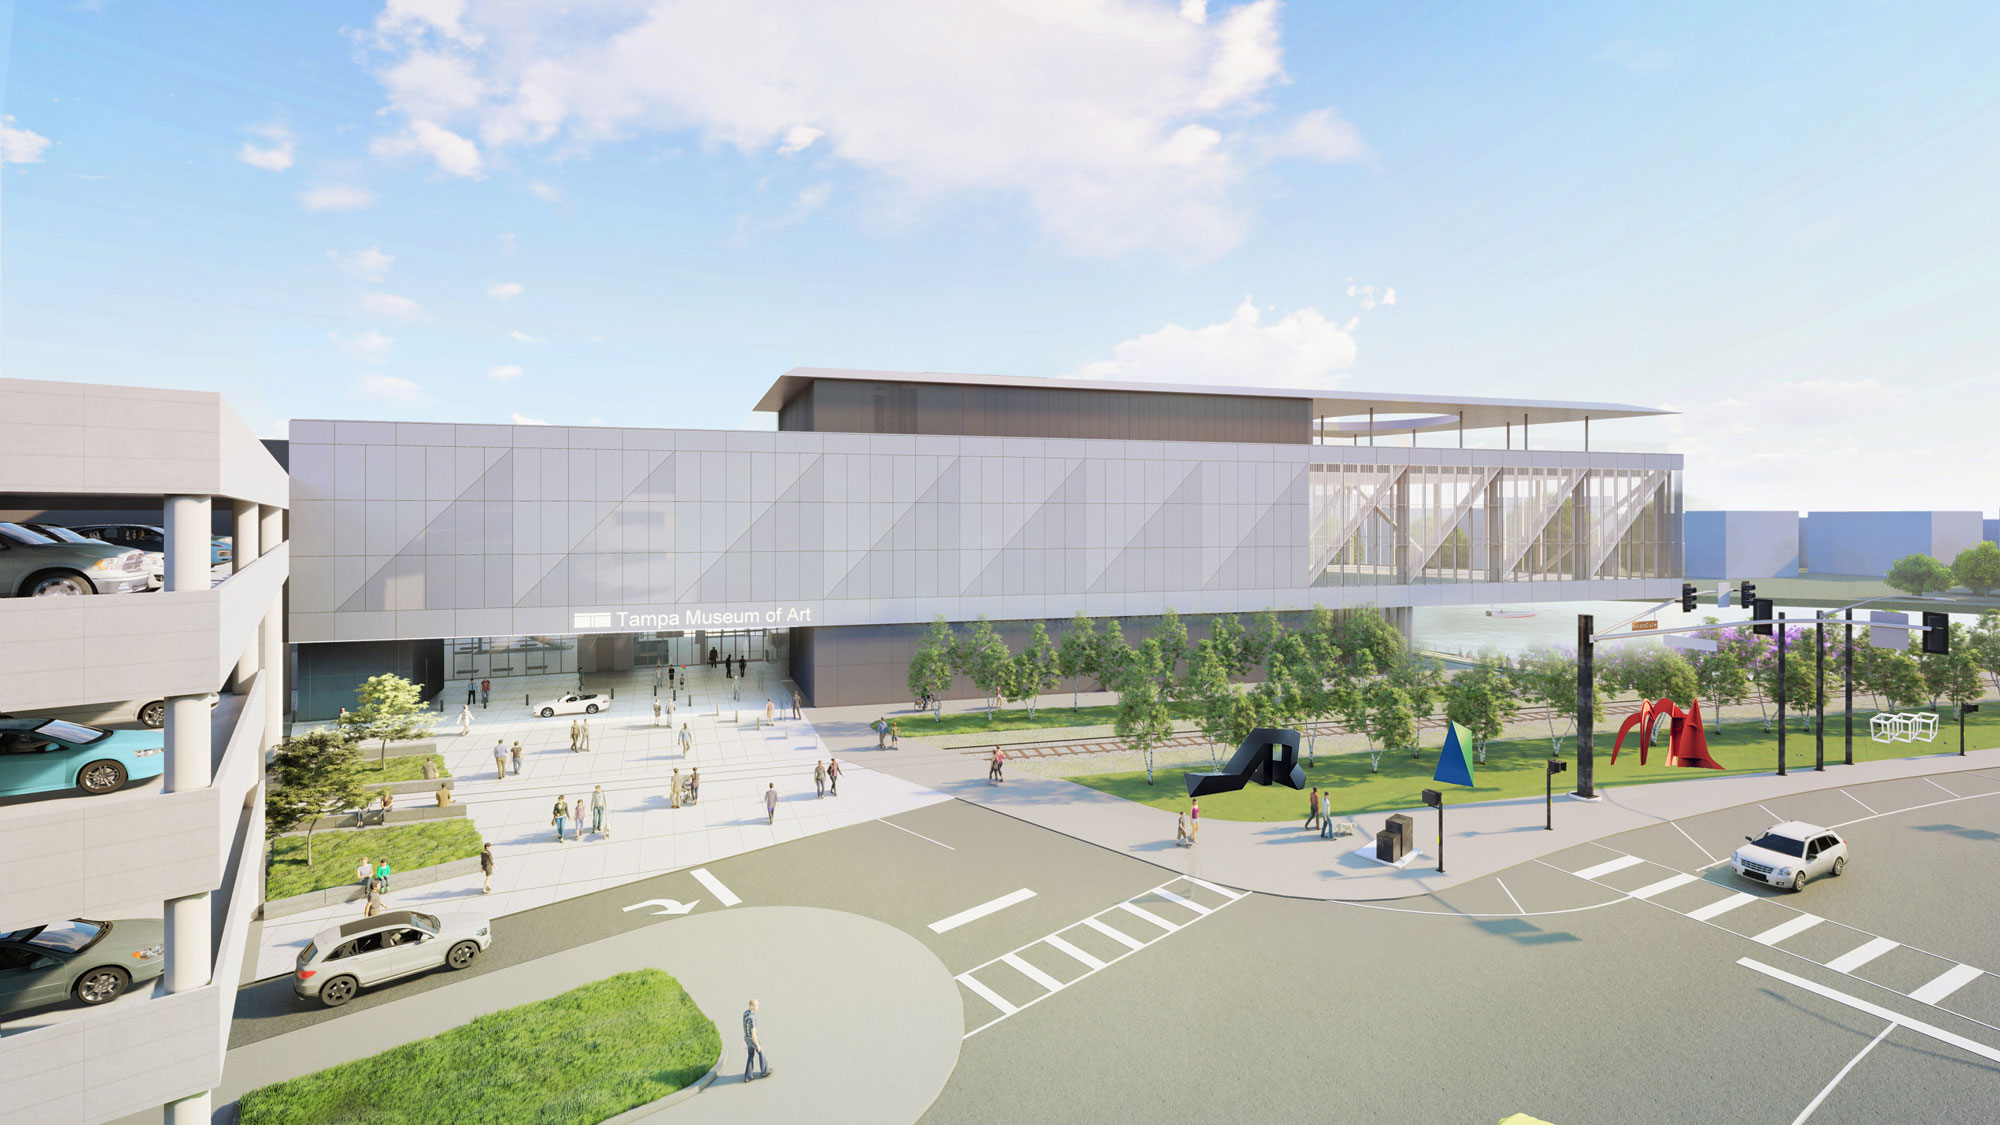 Rendering of the Expansion Wing showing the North Entry Plaza and North Sculpture Park.